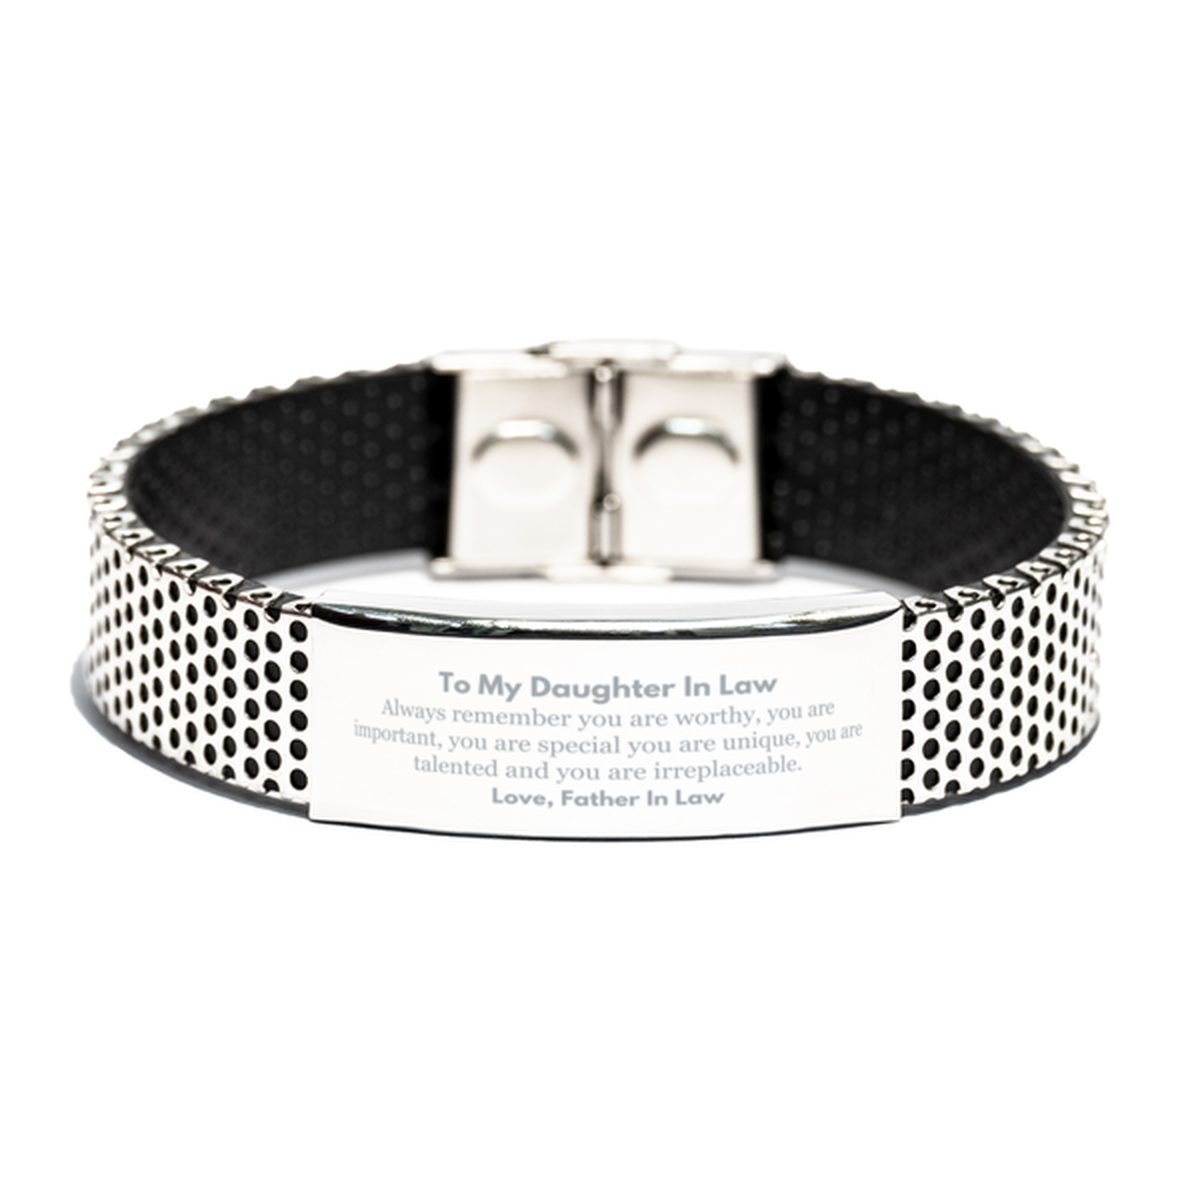 Daughter In Law Birthday Gifts from Father In Law, Inspirational Stainless Steel Bracelet for Daughter In Law Christmas Graduation Gifts for Daughter In Law Always remember you are worthy, you are important. Love, Father In Law